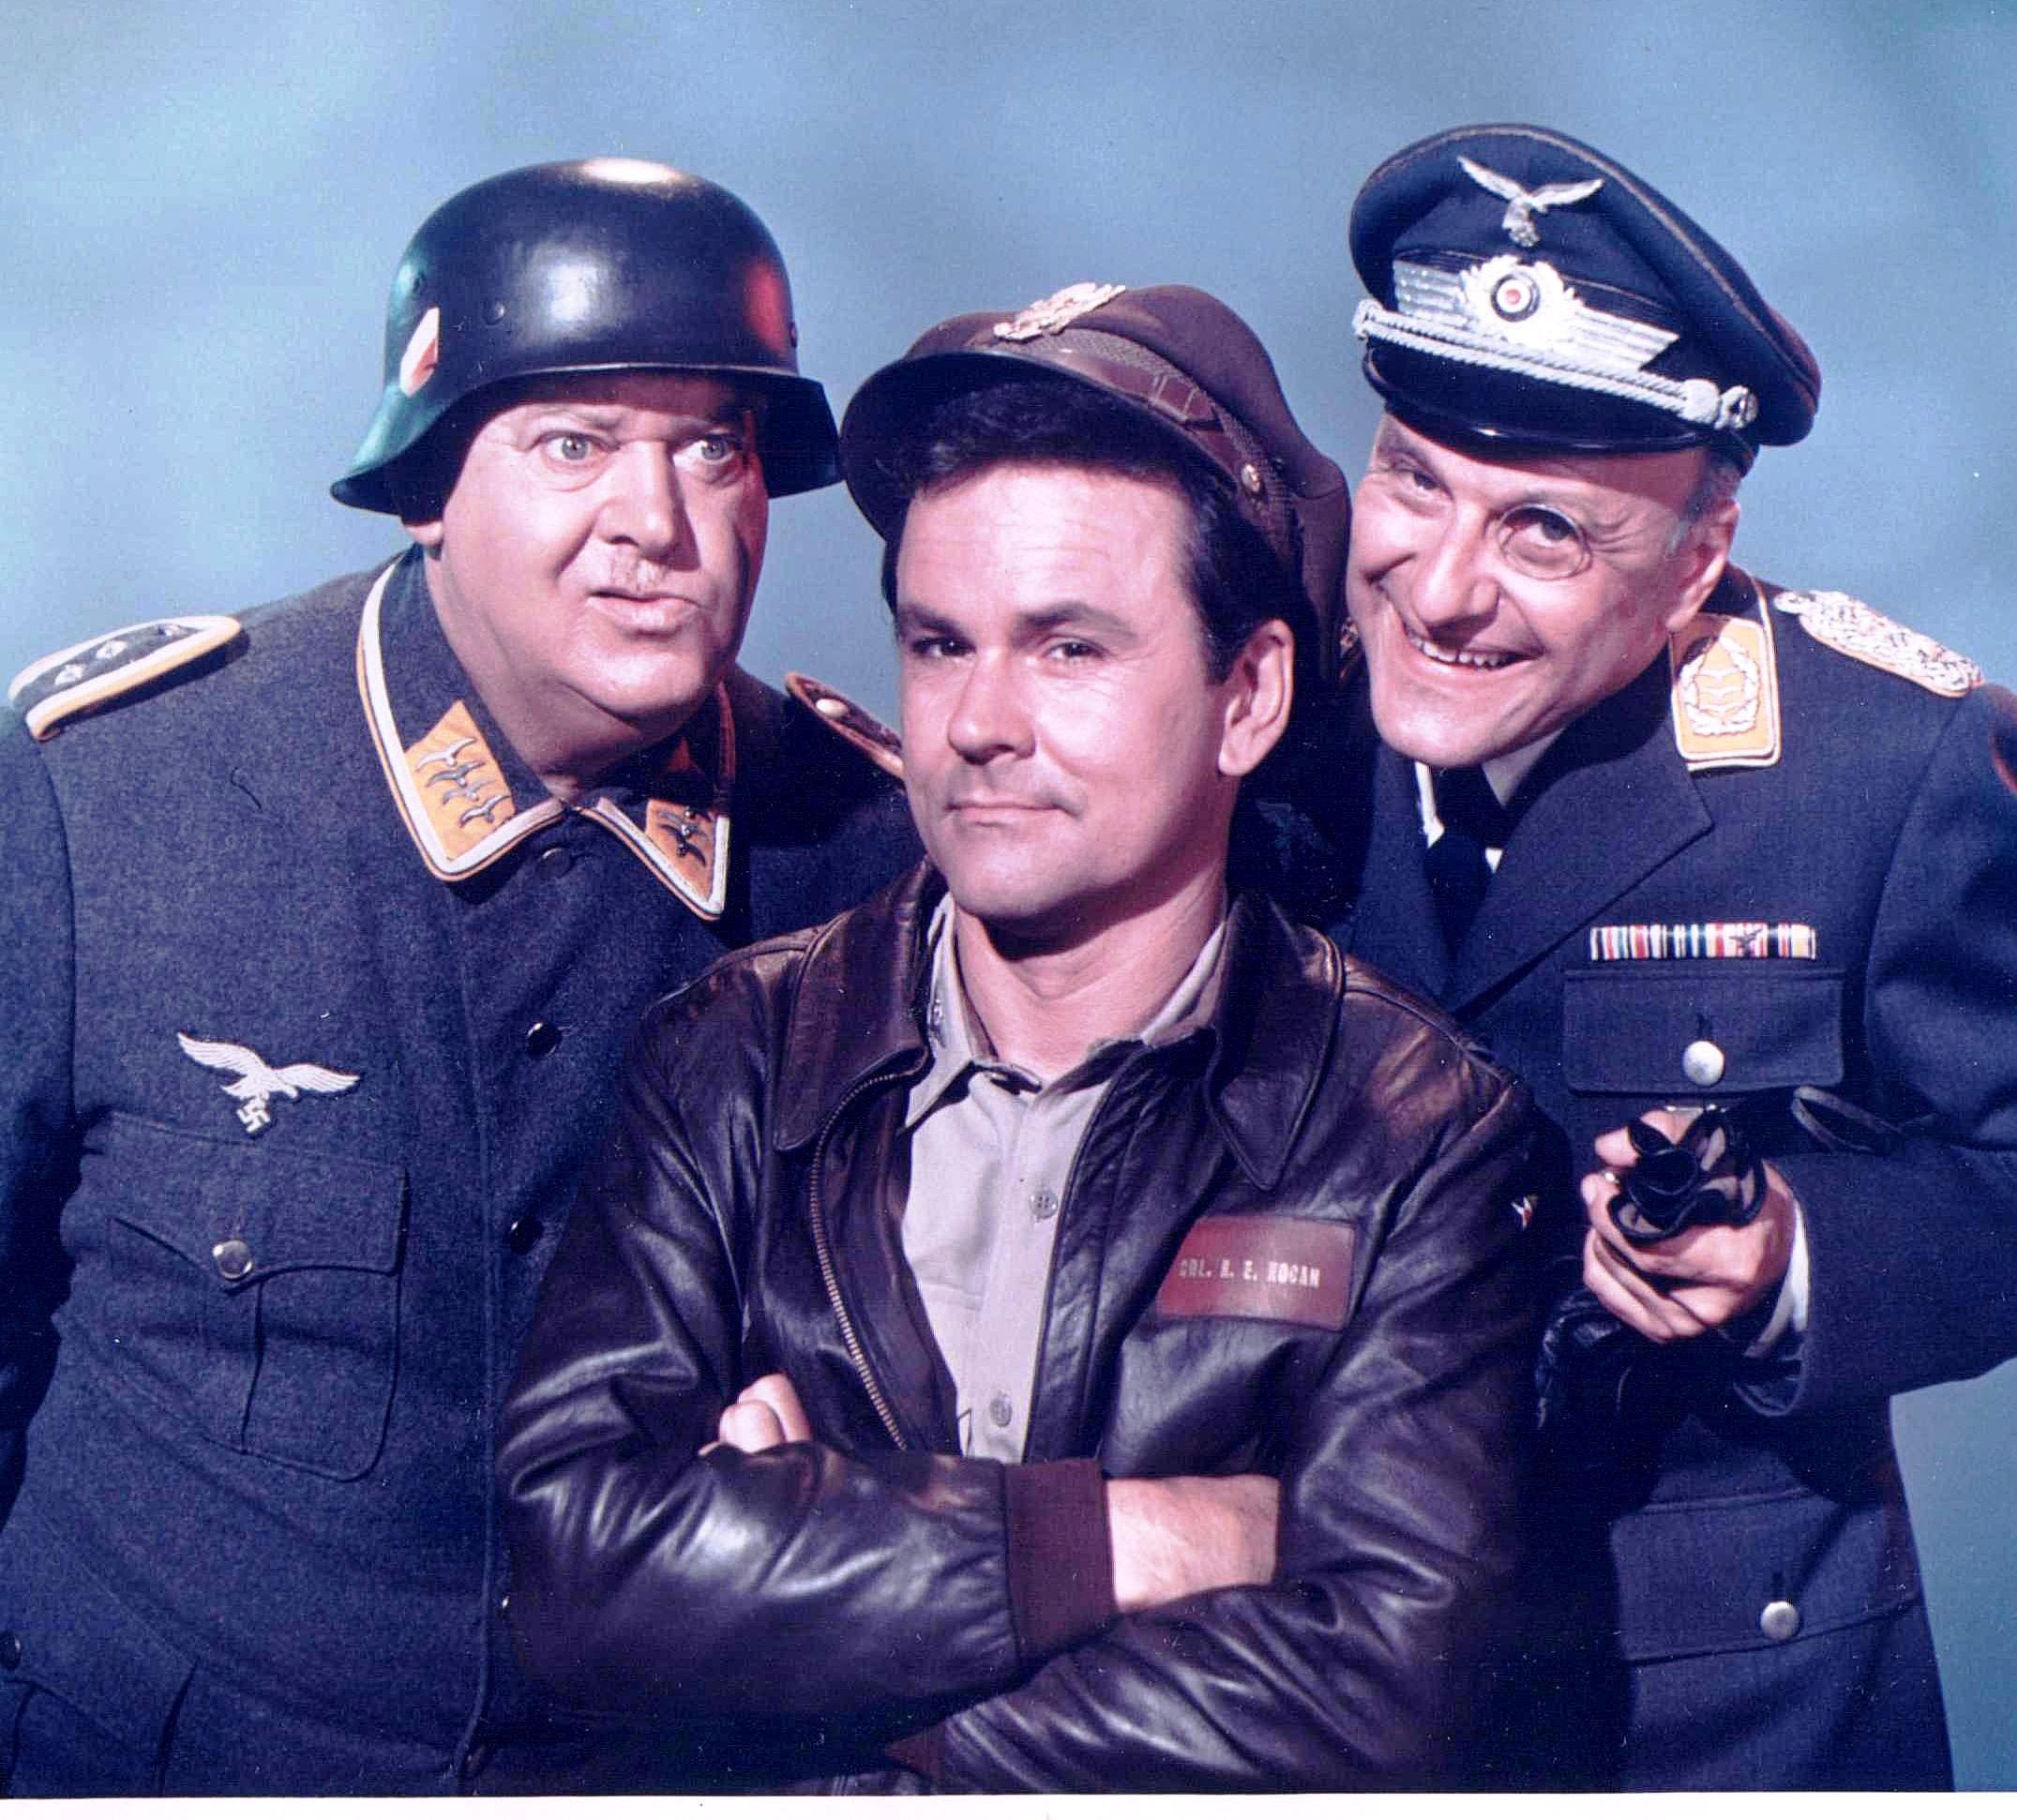 All of us who grew up in the 60’s watched Hogan’s Heroes